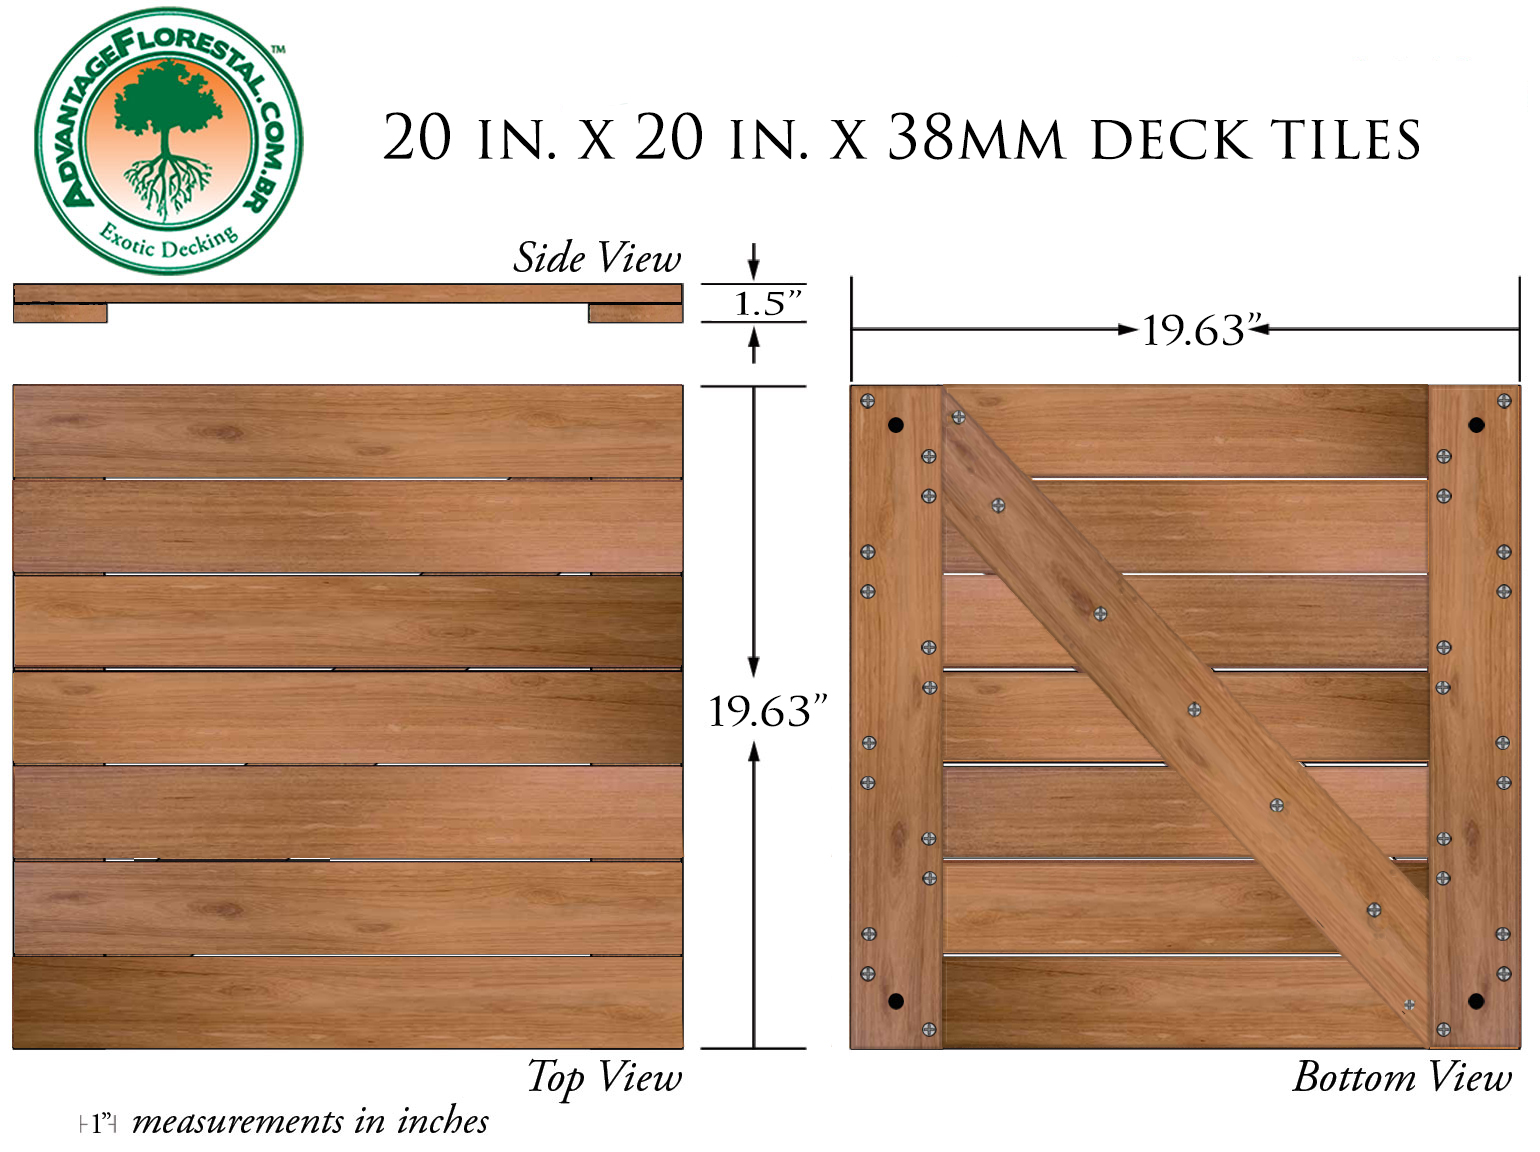 Angelim Pedra Deck Tile 20 in. x 20 in. x 38mm